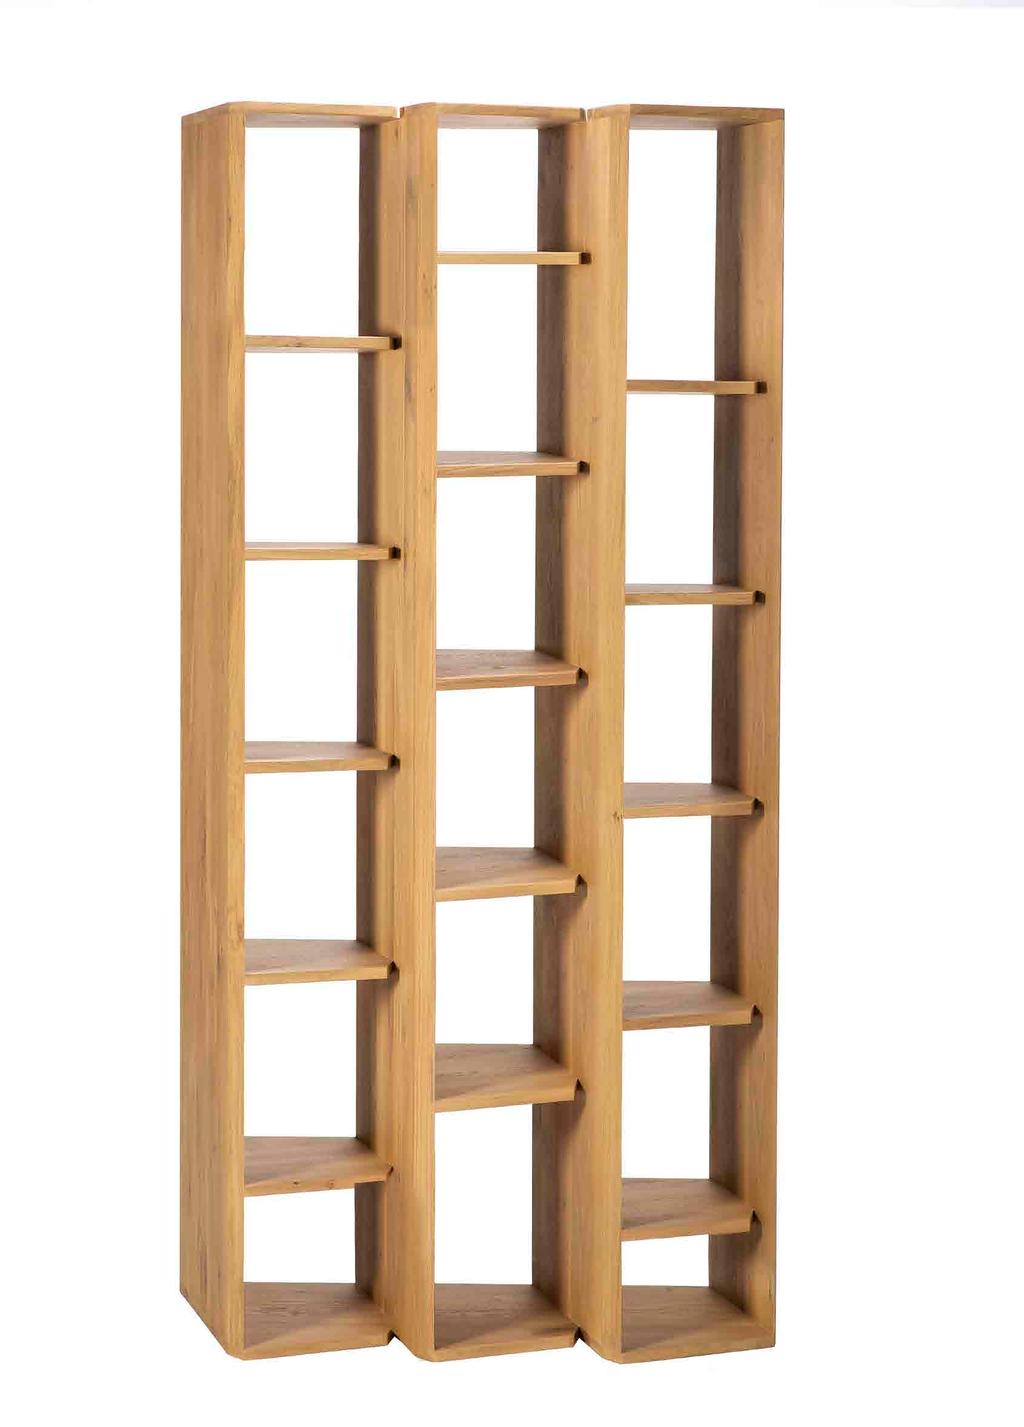 STAIRS RACK by